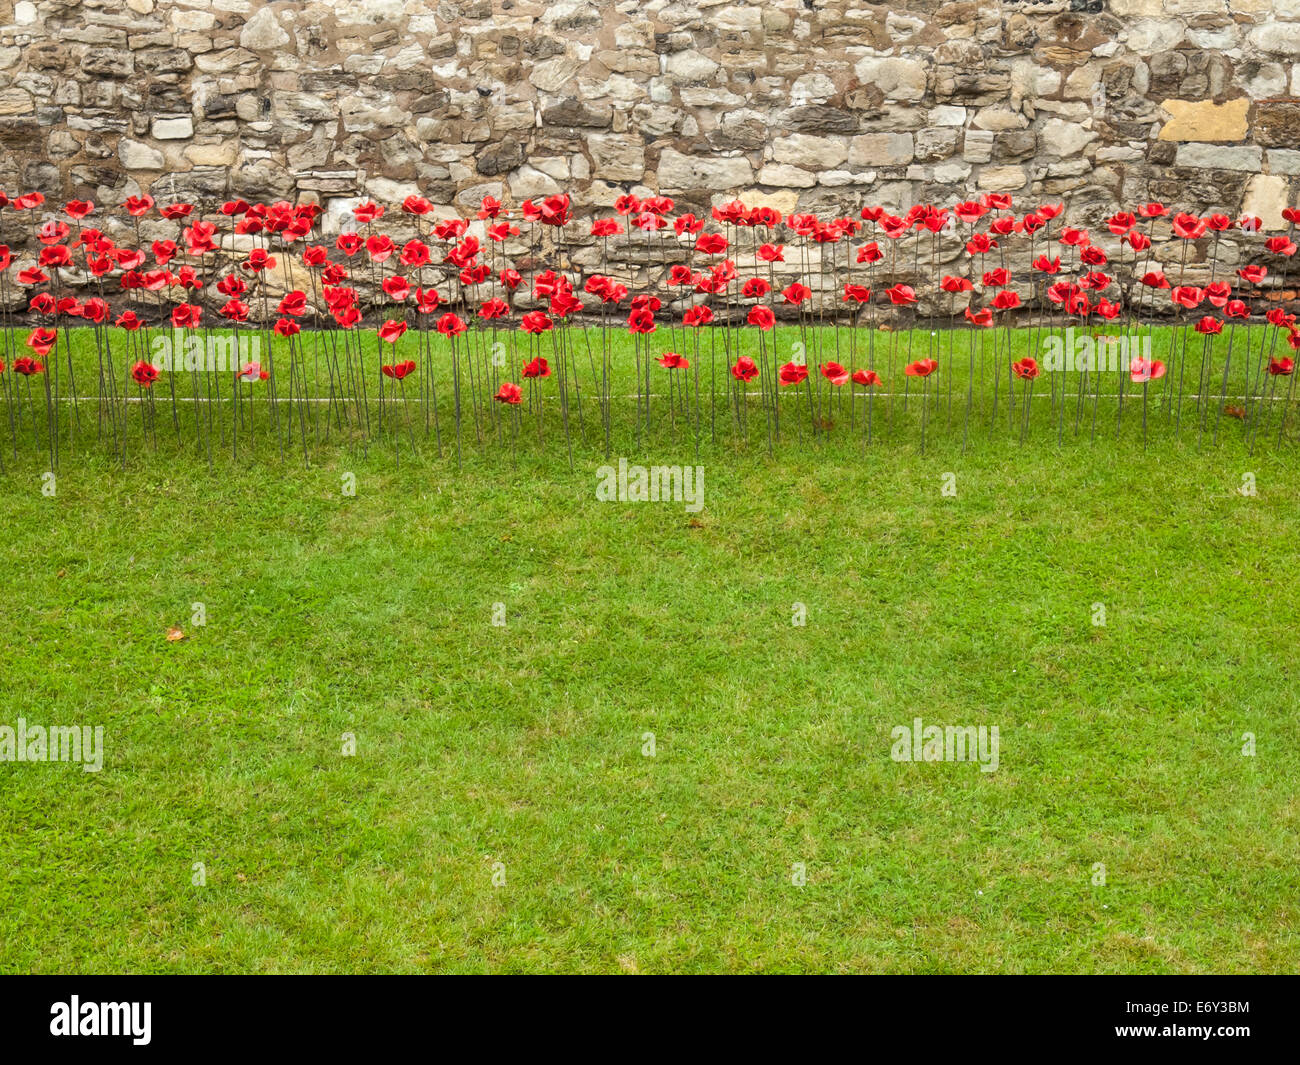 detail of the ceramic poppies exhibit  at the tower of london during heavy rain with the tower wall behind and green lawn Stock Photo